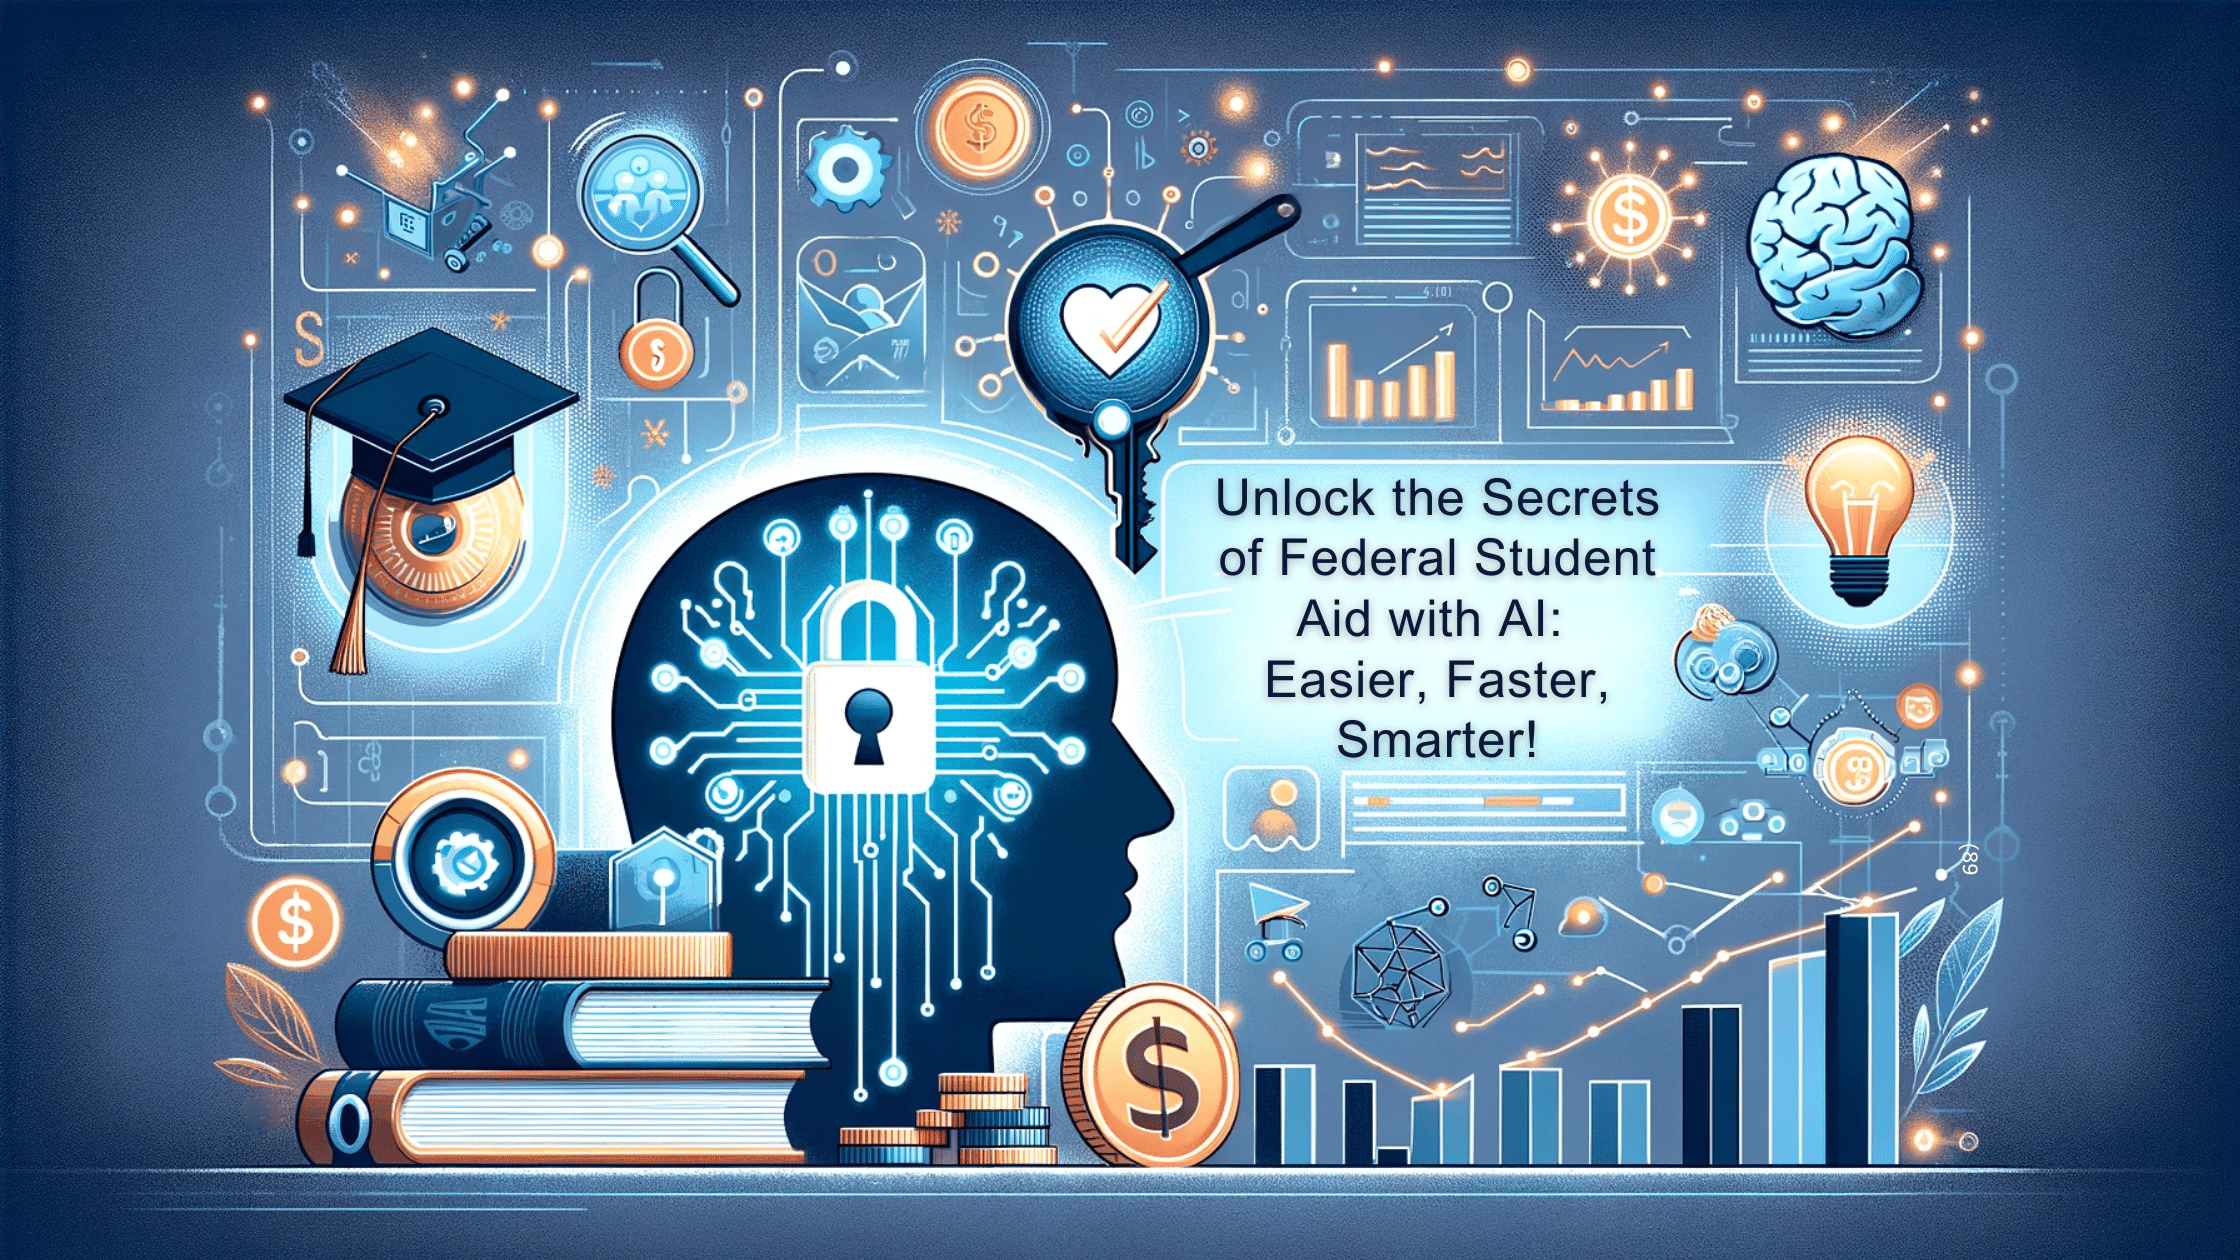 Student Aid with AI